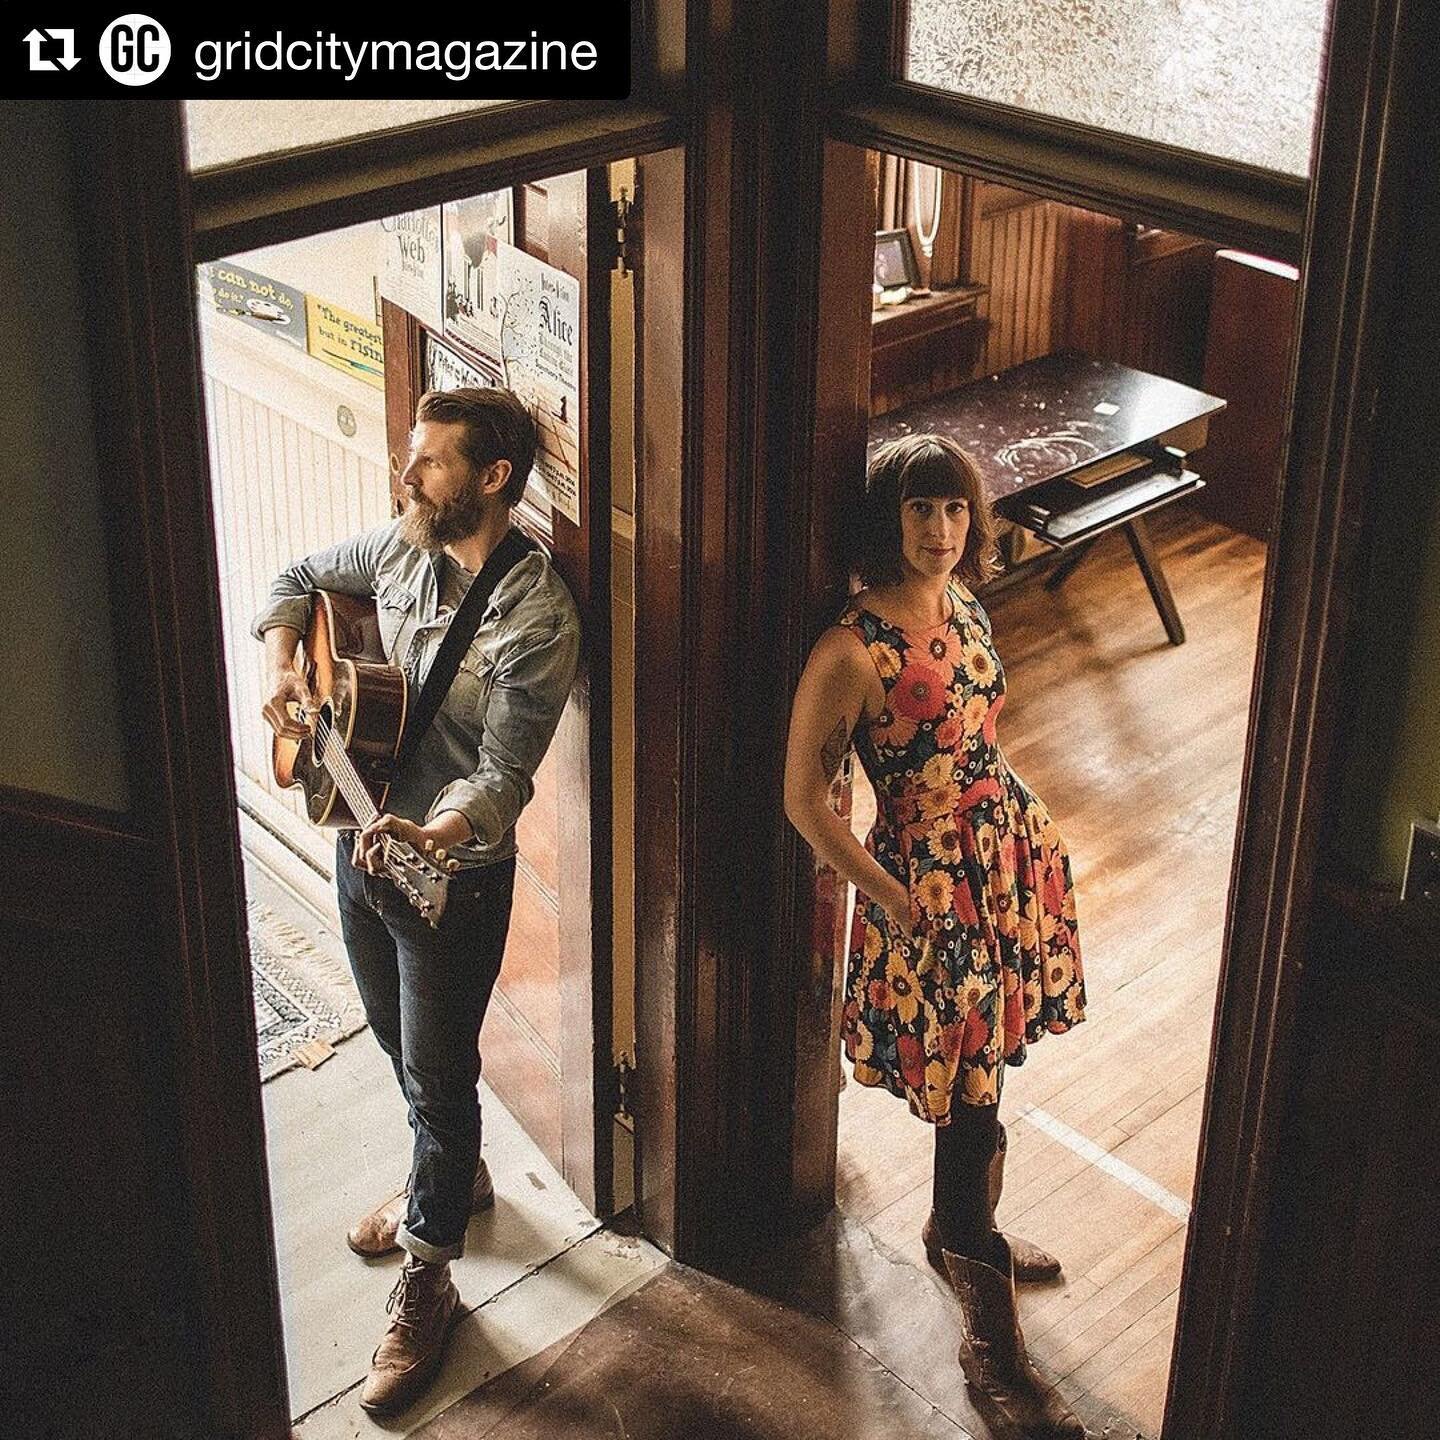 This photoshoot at @interaction_performingarts with @tomatotomato.sj was a 2020 highlight for me. Check out their upcoming shows and grab their record. One for you and one for a friend!

@gridcitymagazine 
・・・
Tomato/Tomato have not made any plans to